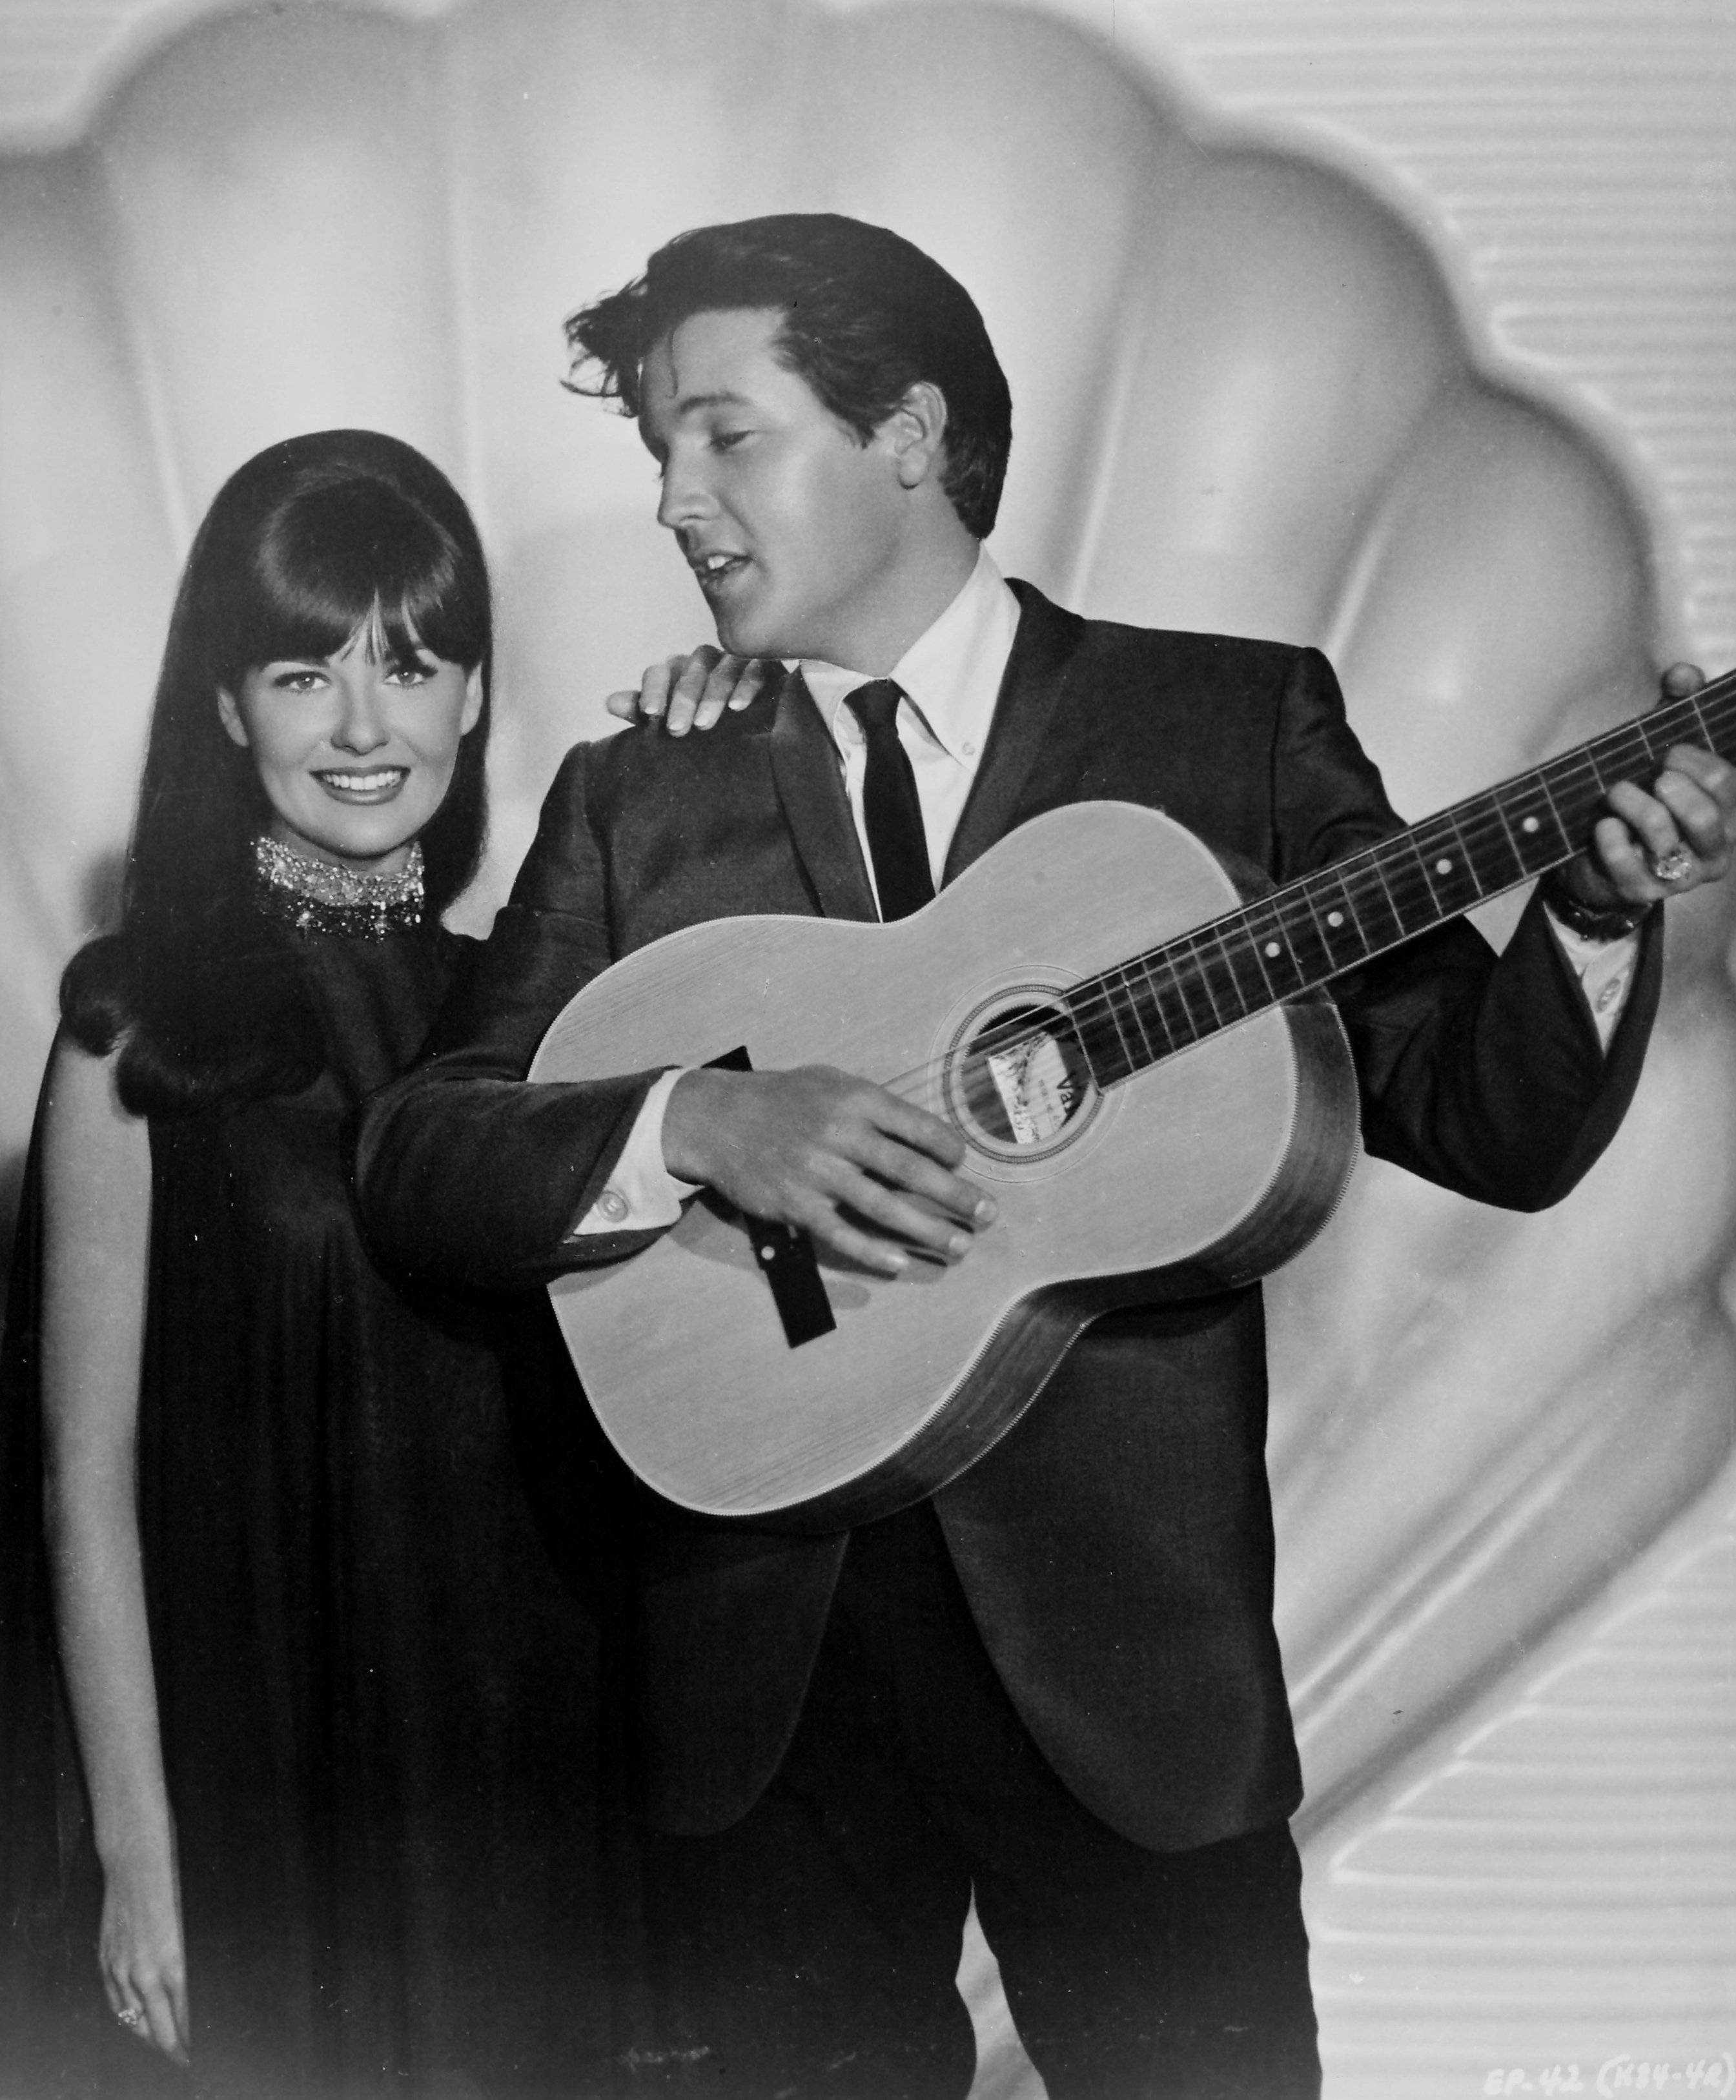 Actress Shelley Fabares as Dianne Carter and singer Elvis Presley as Scott Hayward in the musical film "Clambake" in 1967 ┃Source: Getty Images